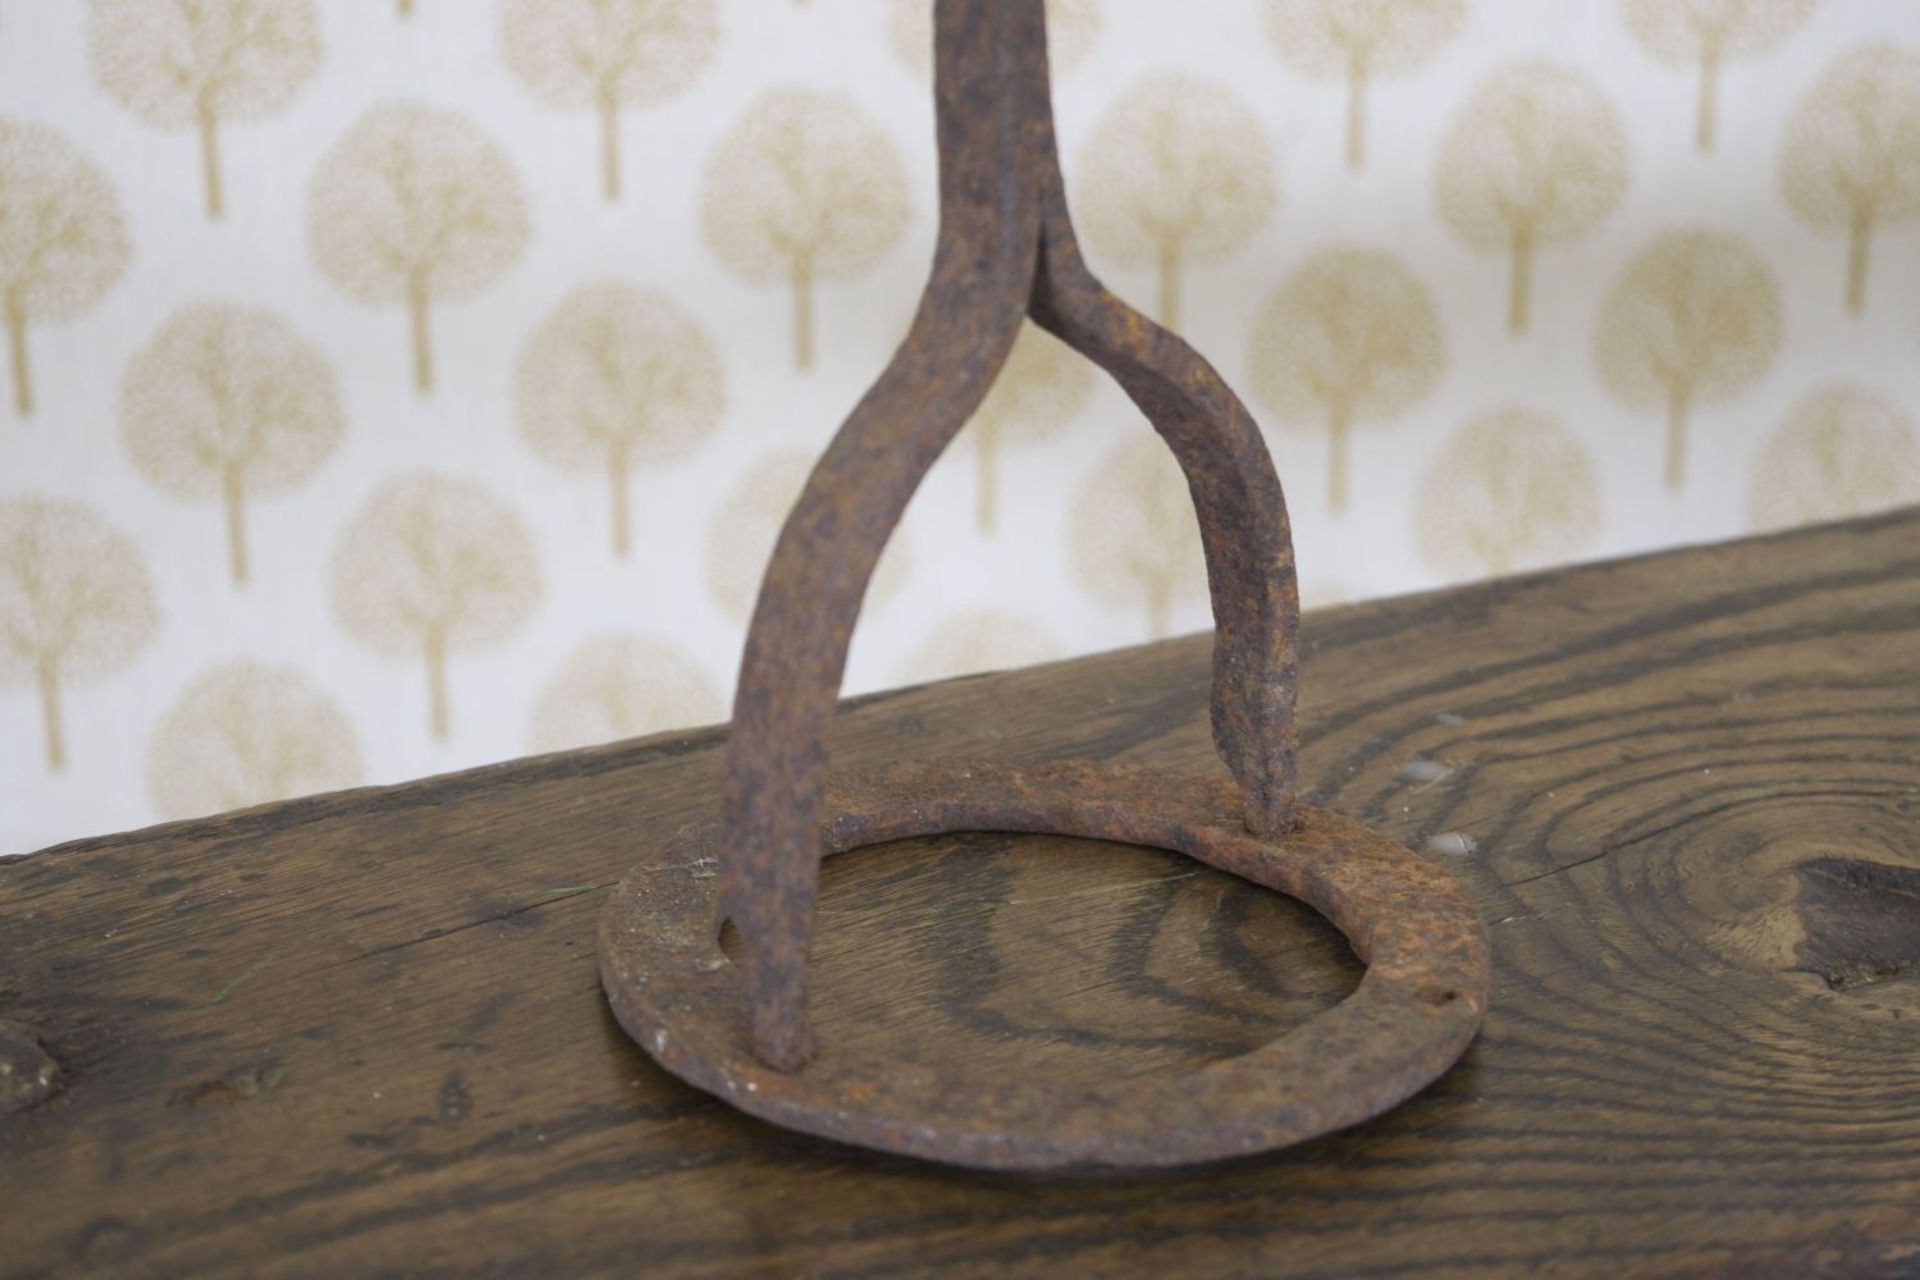 19TH-CENTURY FORGED IRON CANDLE SPIKE - Image 2 of 2